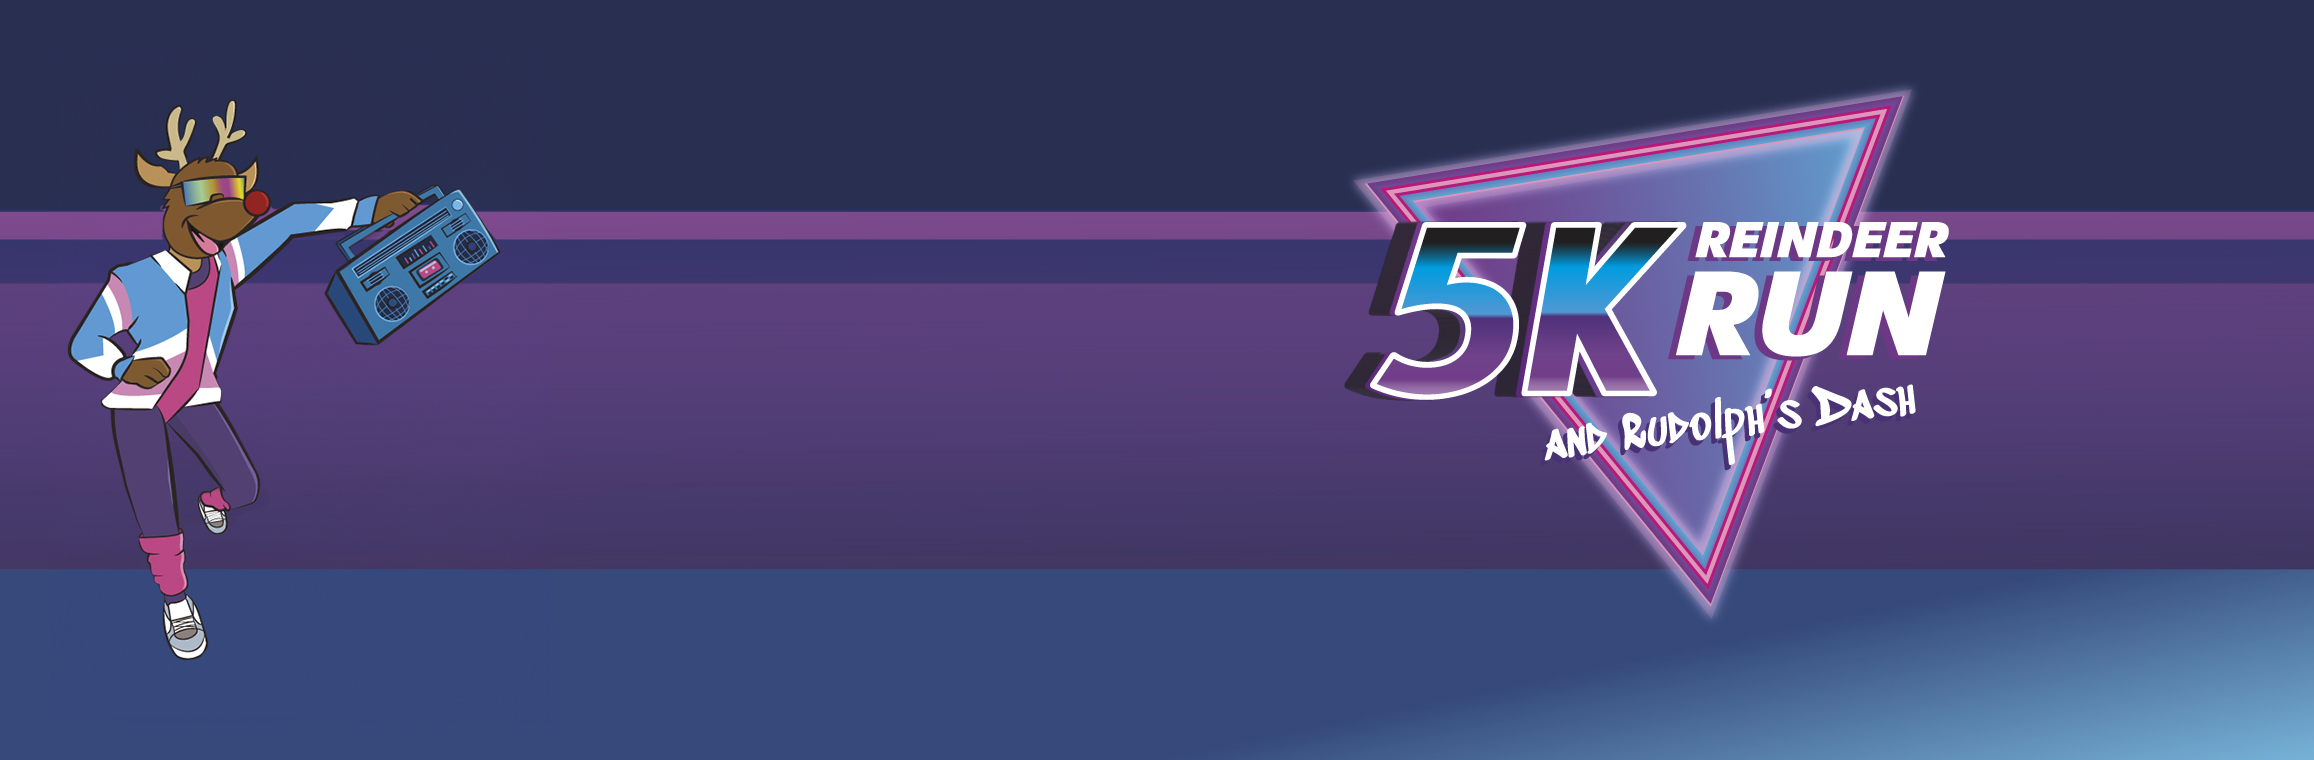 gradient blue and purple banner with an animated reindeer on the left side wearing 80s gear and the 5K Logo on the right